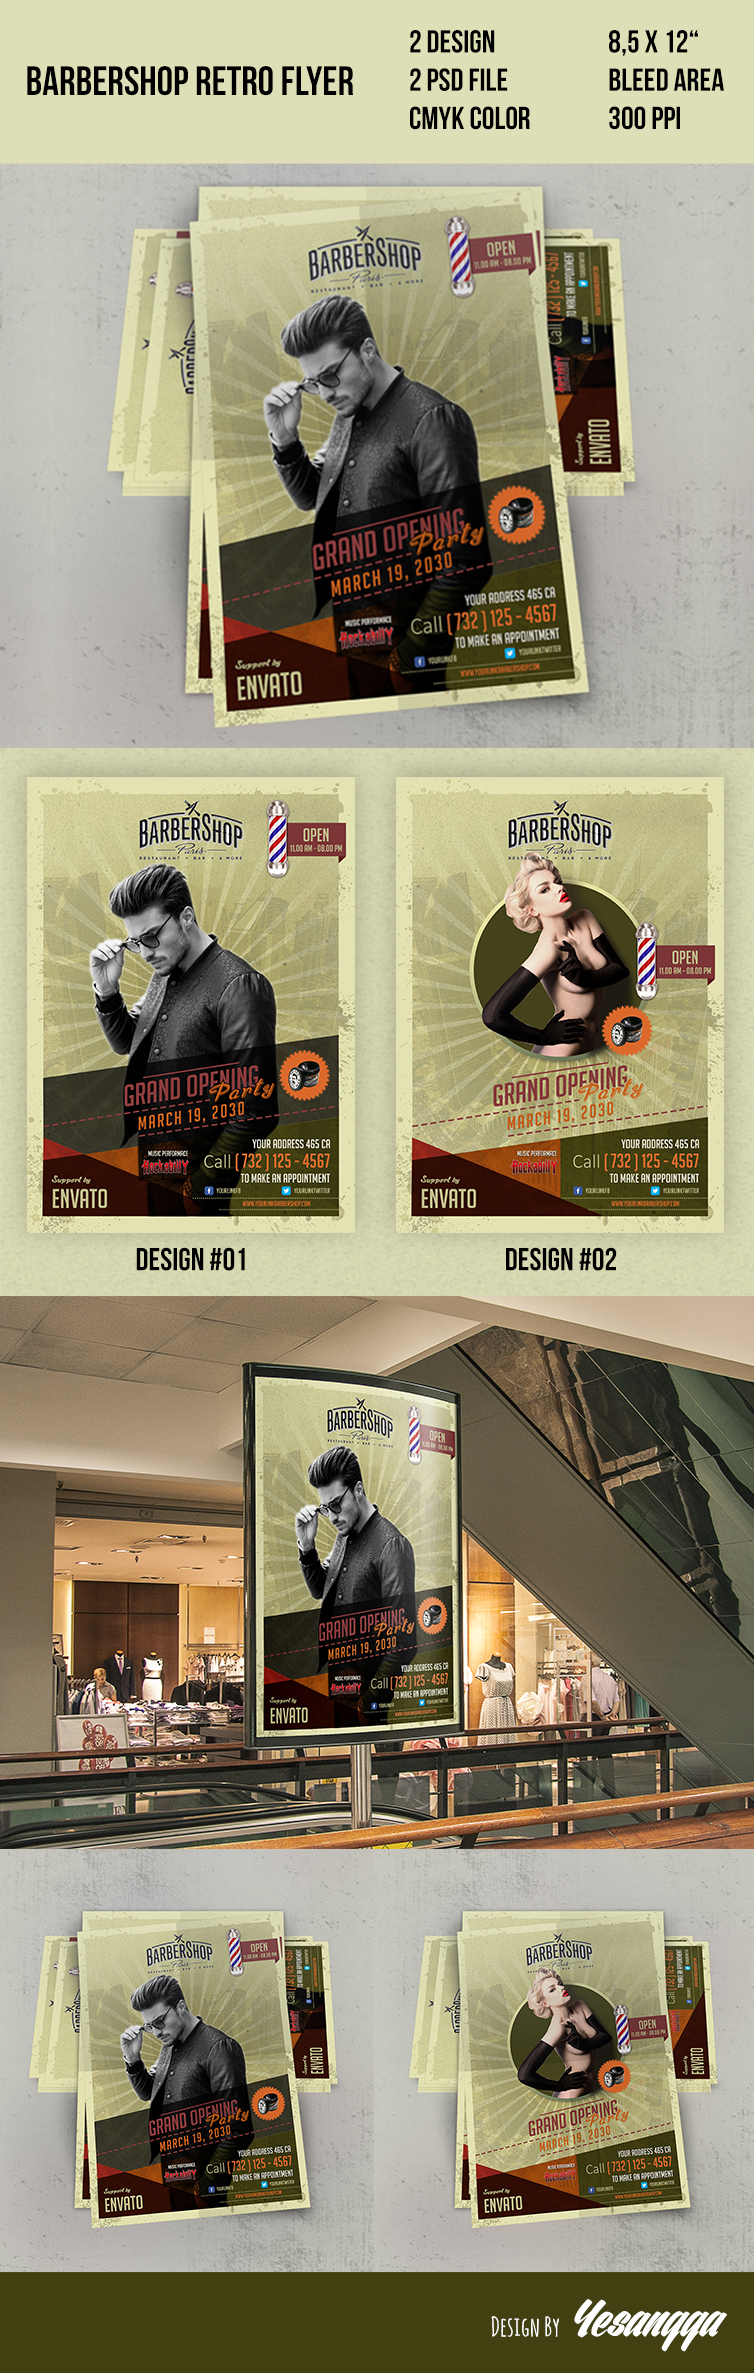 flyer free download template psd Retro vintage barbershop flyer template free download